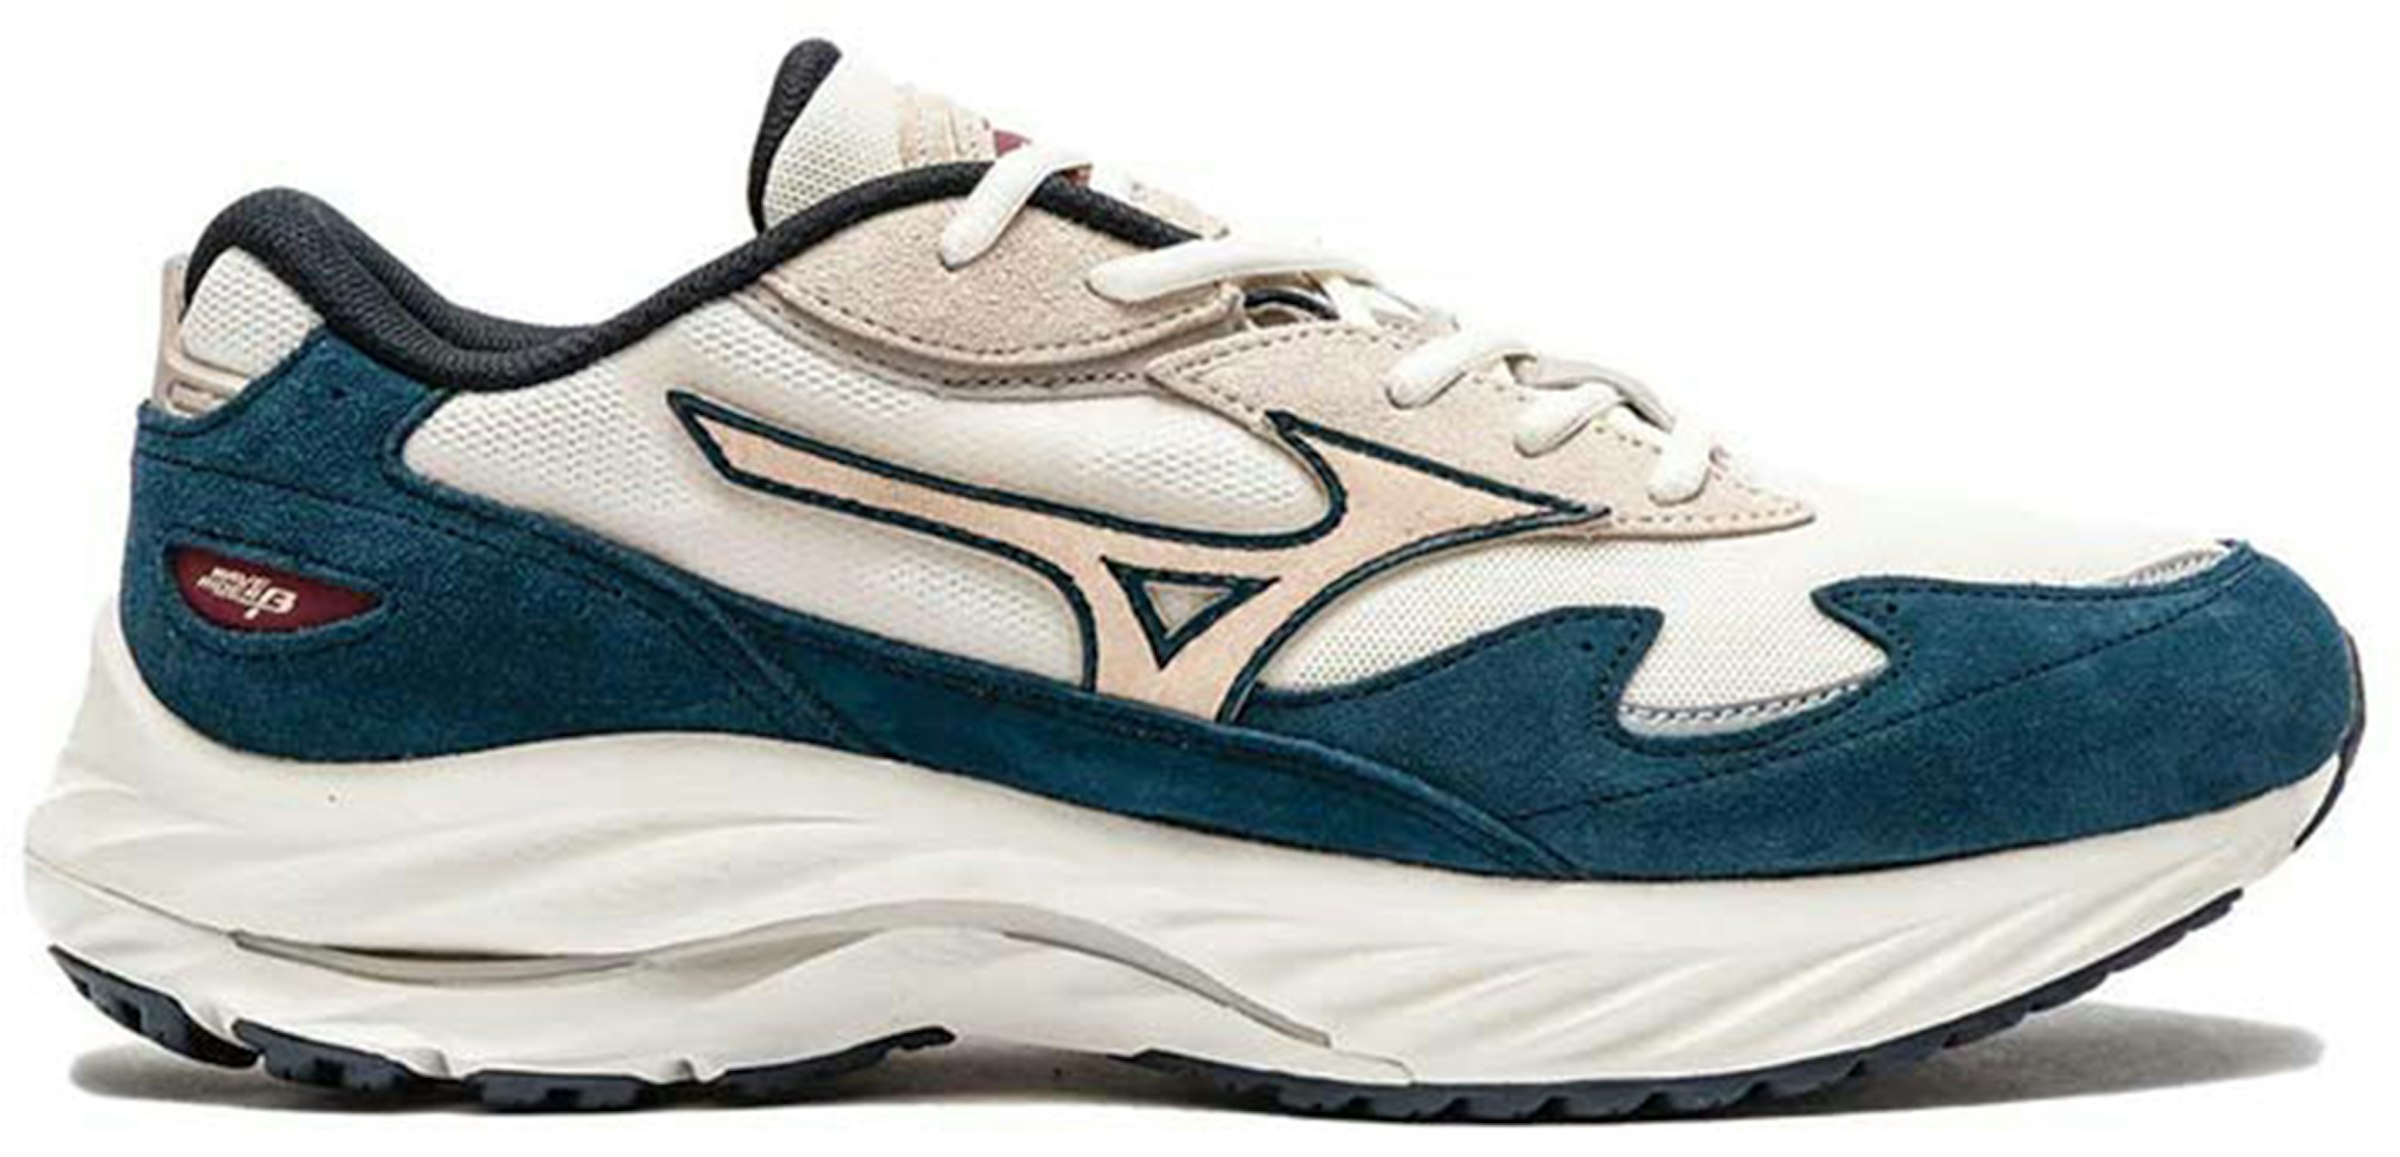 Mizuno Put the Wave Rider β 'Grey' and 'Beige' to the Test - Sneaker Freaker